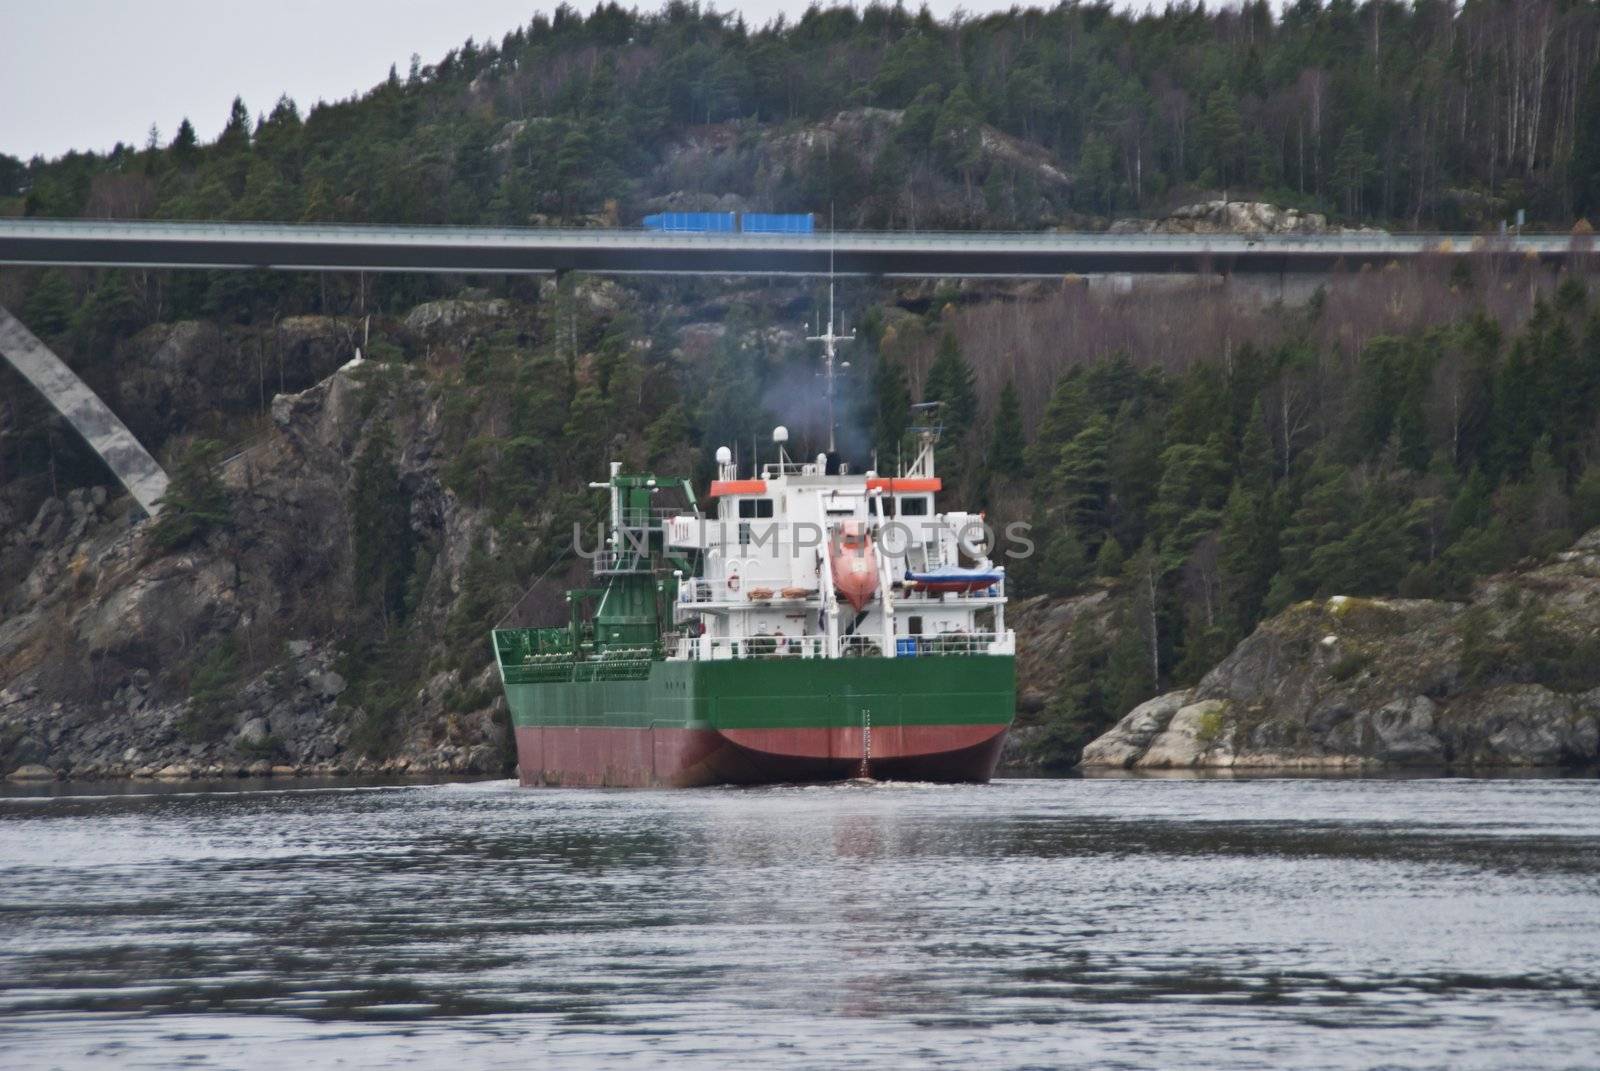 cargo ship in ringdalsfjord, image 7 by steirus